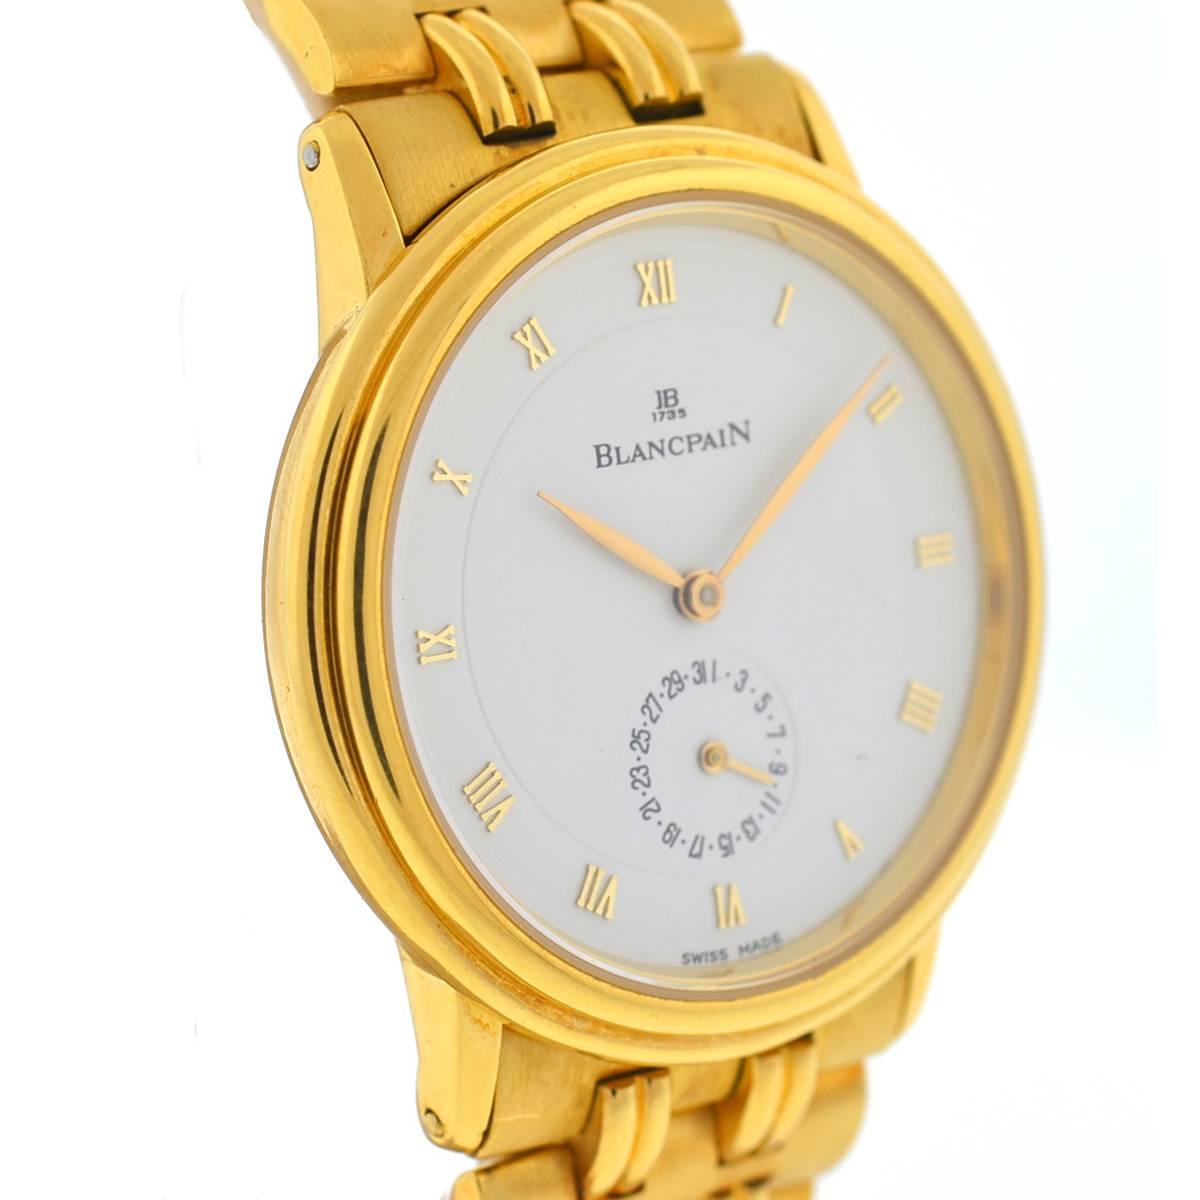 Company - Blancpain
Model - VIlleret 4795
Case Metal - 18kt Yellow Gold
Case Size - 37mm
Dial - White
Weight - 125.5g
Bracelet - 18kt Yellow Gold
Crystal - Sapphire Crystal
Movement - Automatic
Features - Hours, Minutes, Date
Includes - Watch